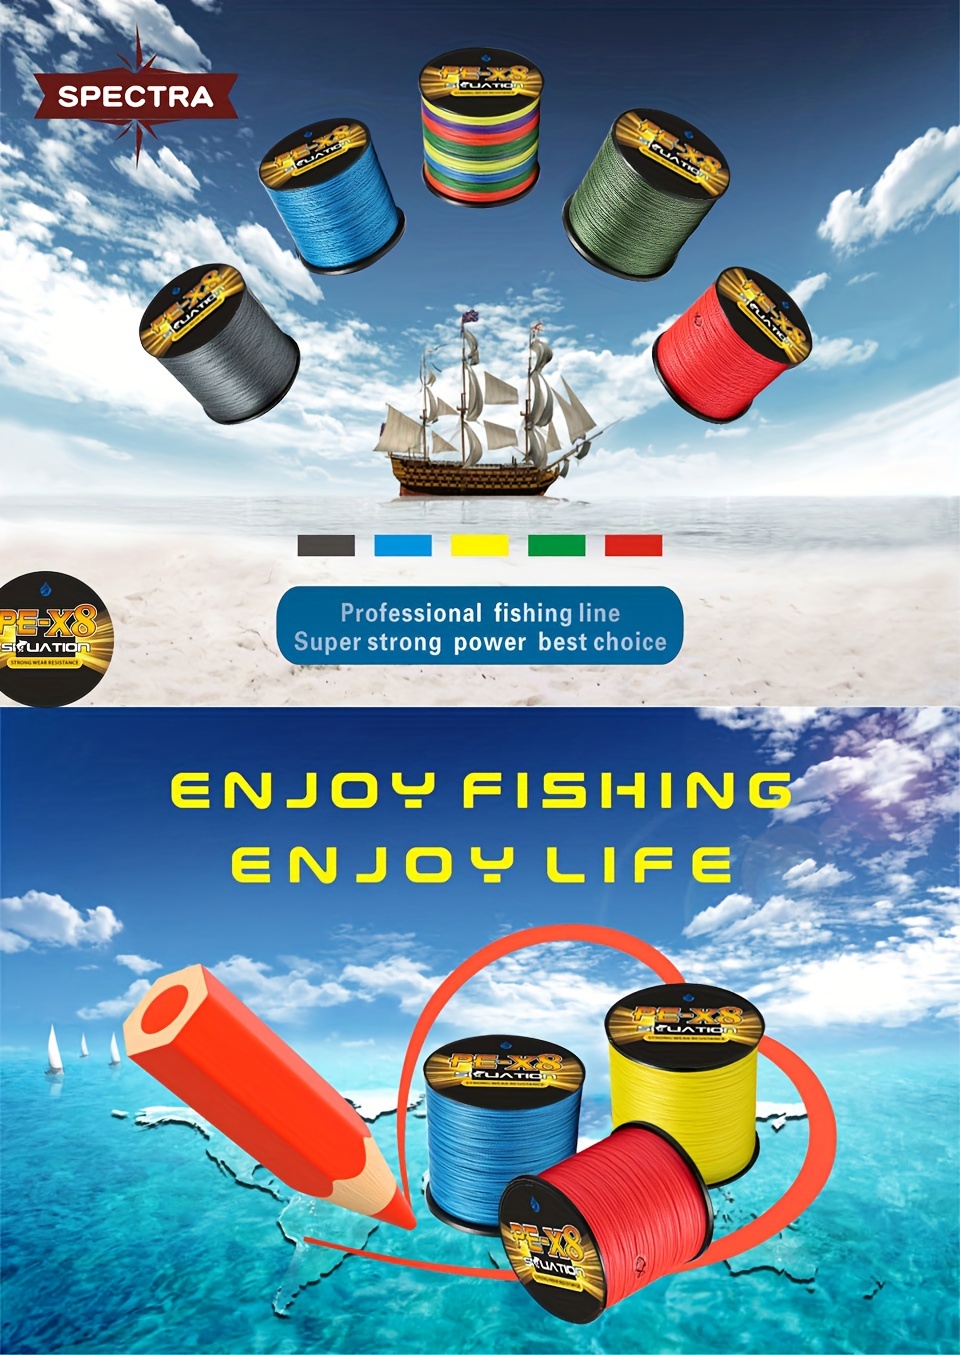 300m/500m 8 Strands Wear Resistant PE Fishing Line, 328yds/546yds Long  Throwing Strong Pull Braided Fishing Line